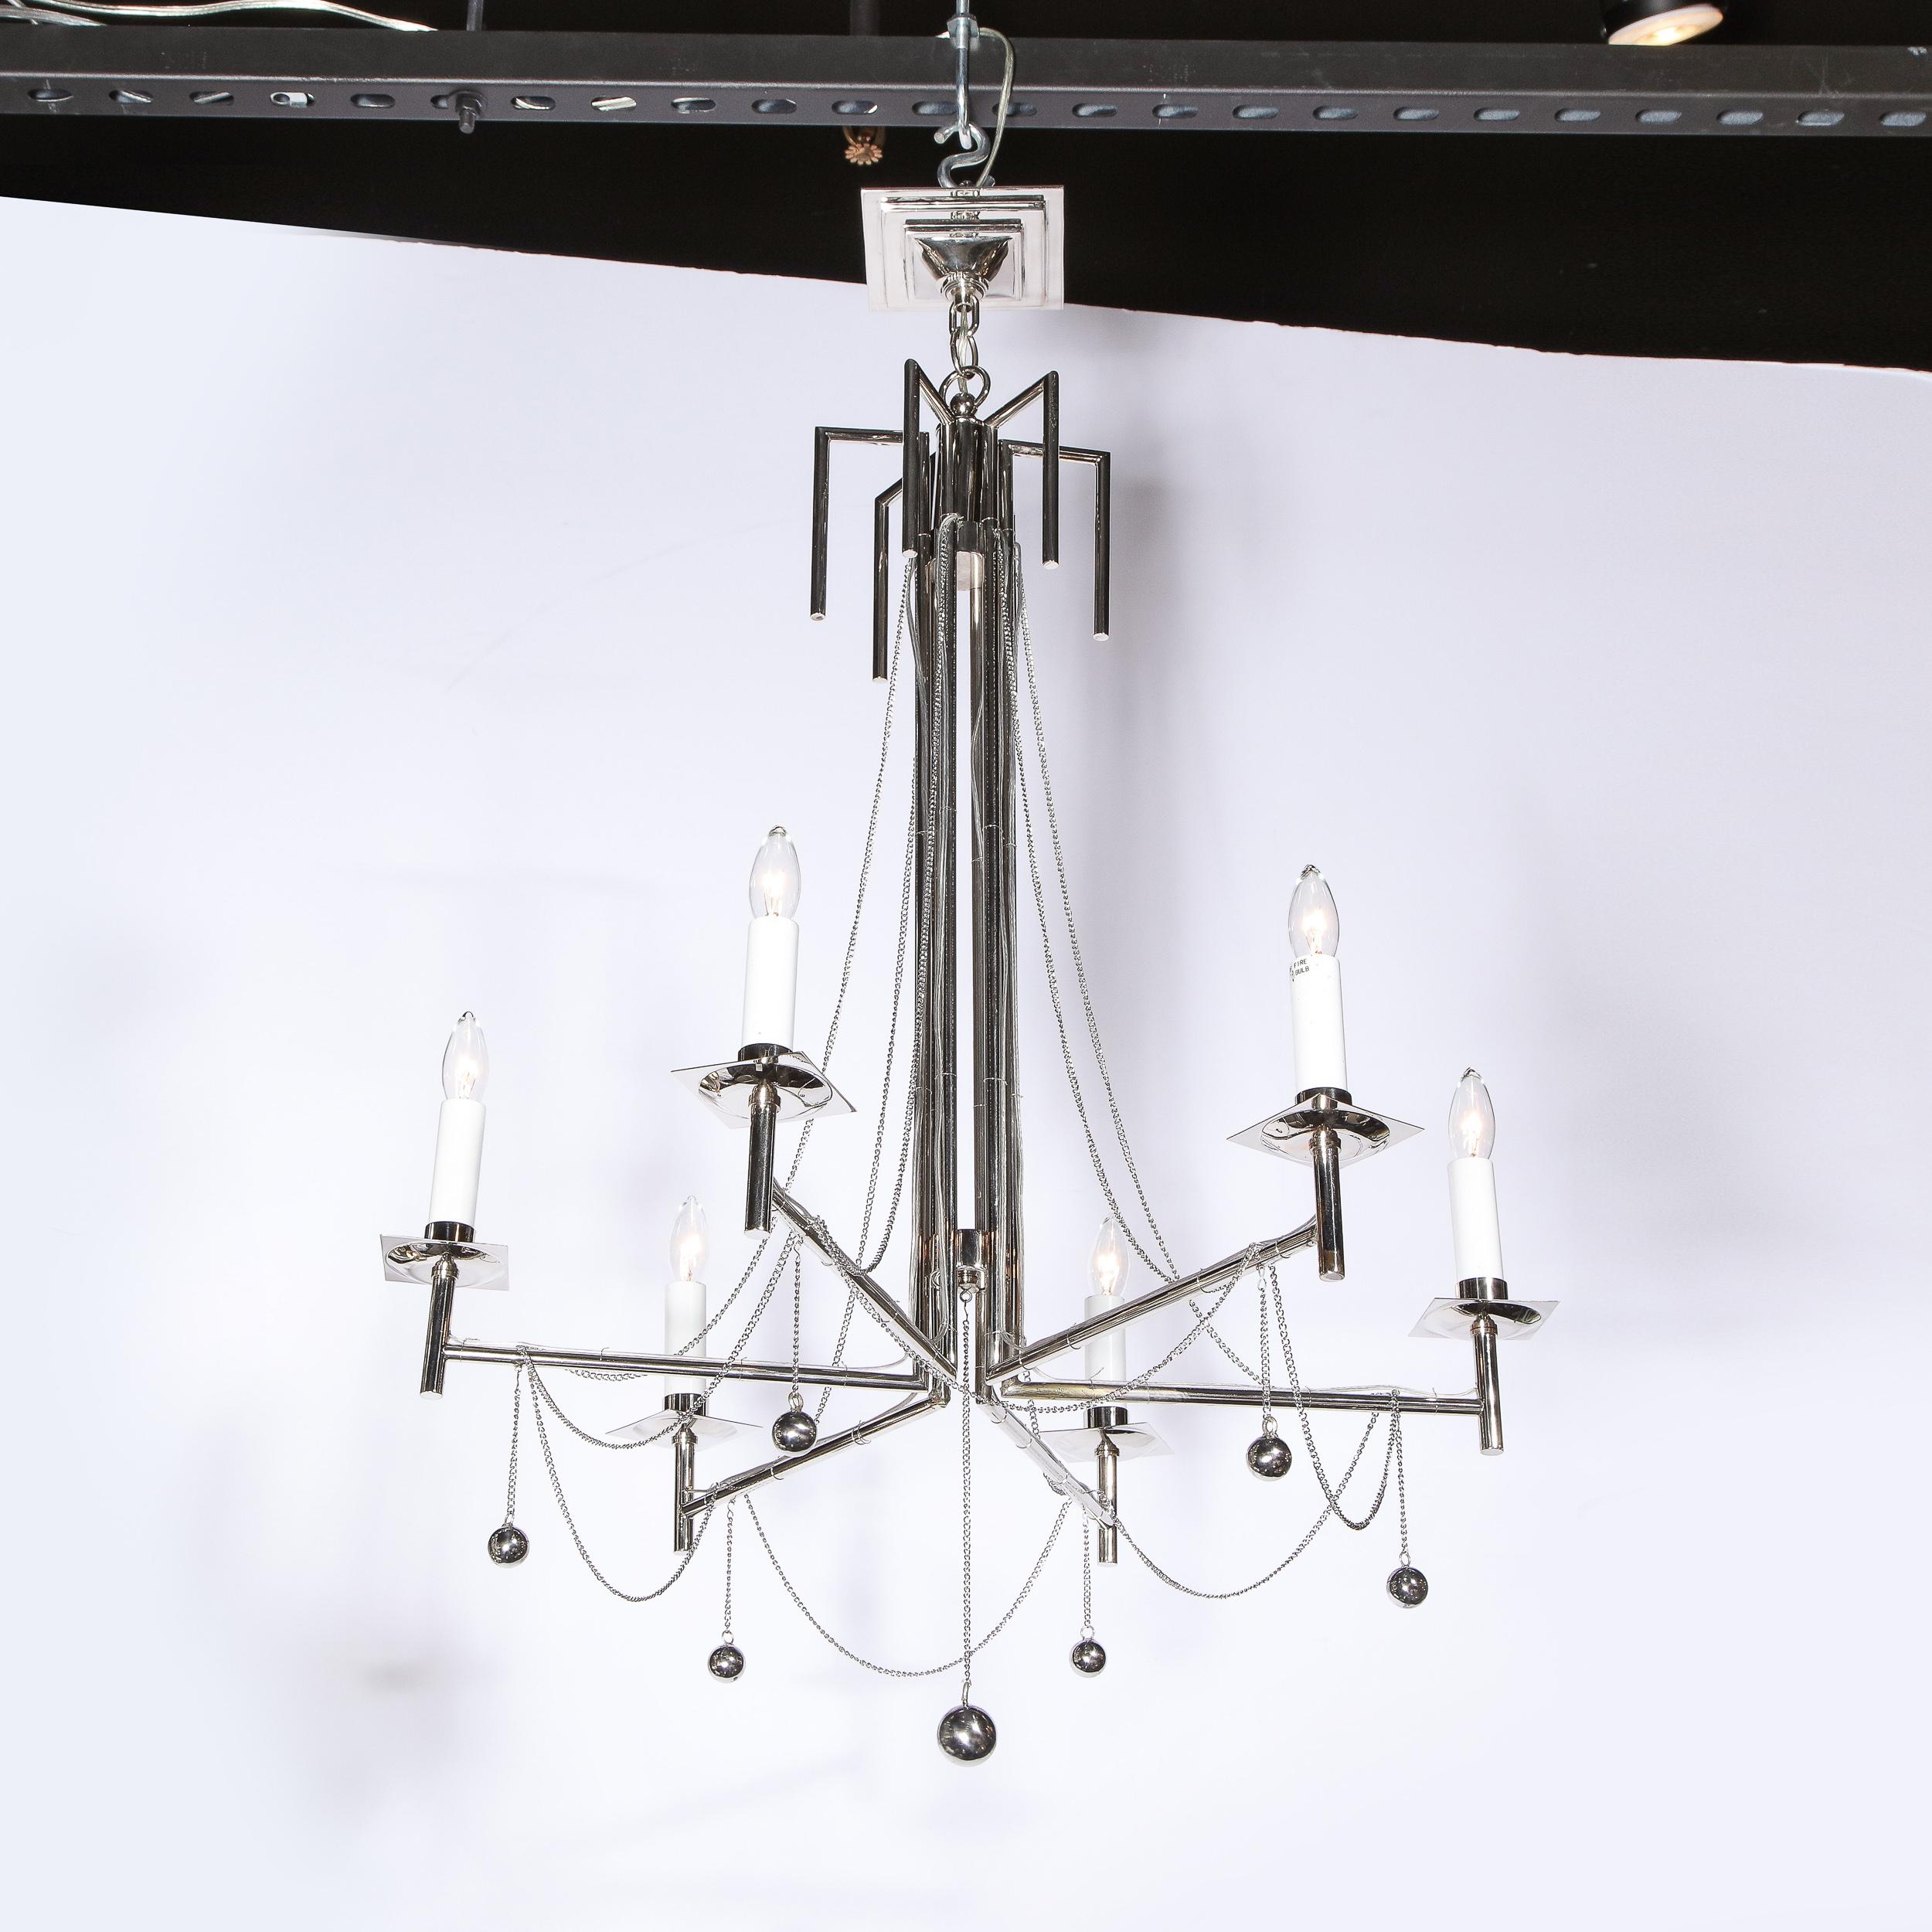 20th Century Modernist Polished Nickel Six Arm Chandelier with Chain and Spherical Details For Sale